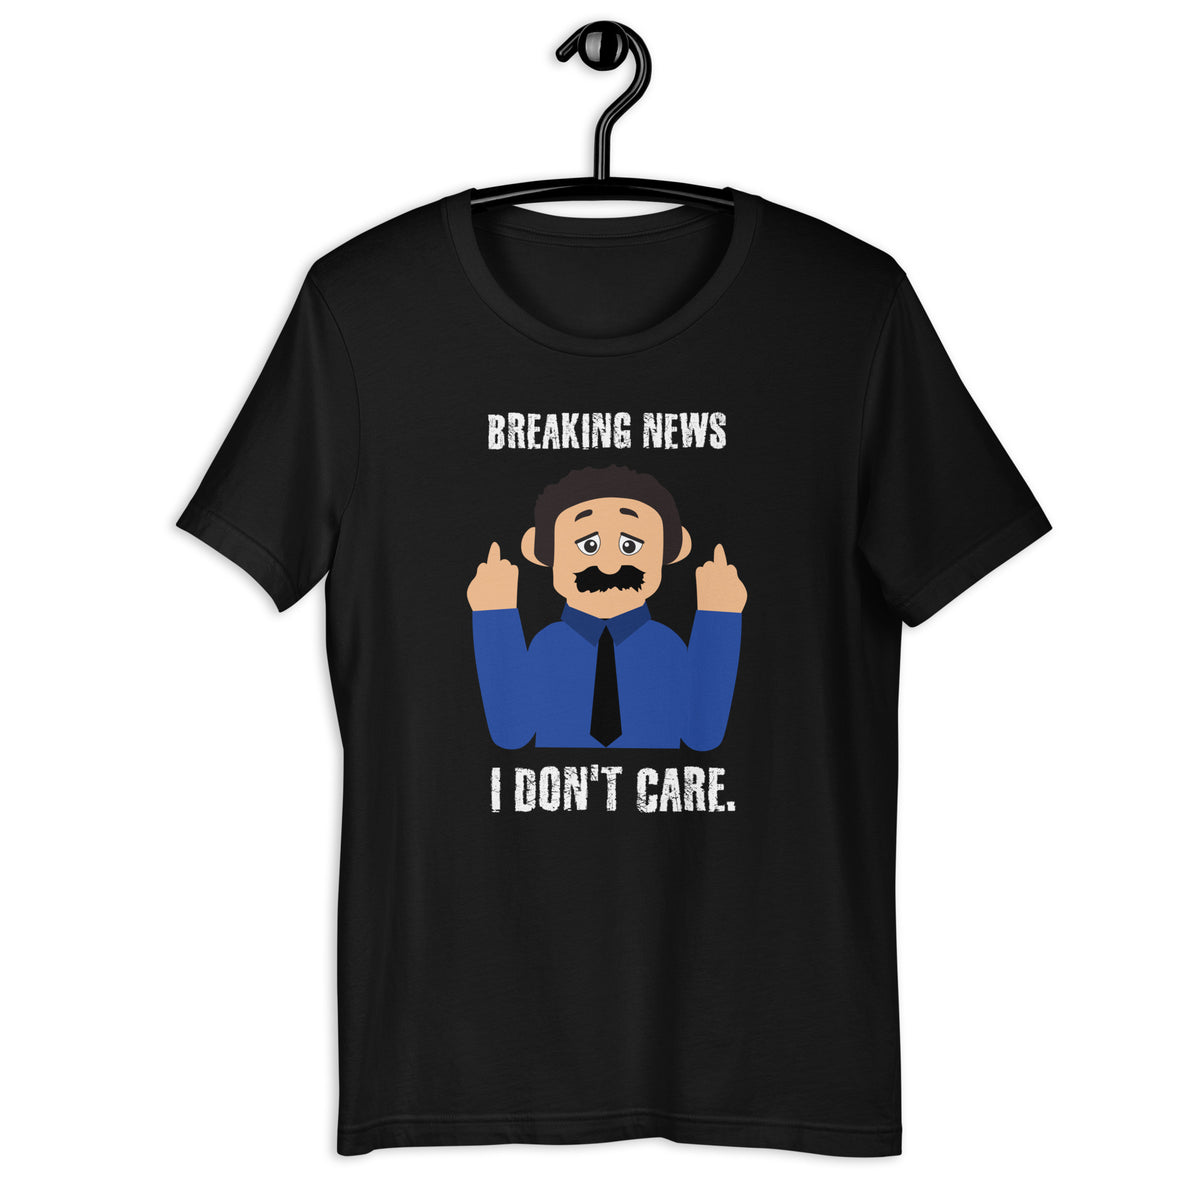 Breaking news - I don't care  Awkward Puppets Diego T-shirt - SHOPNOO